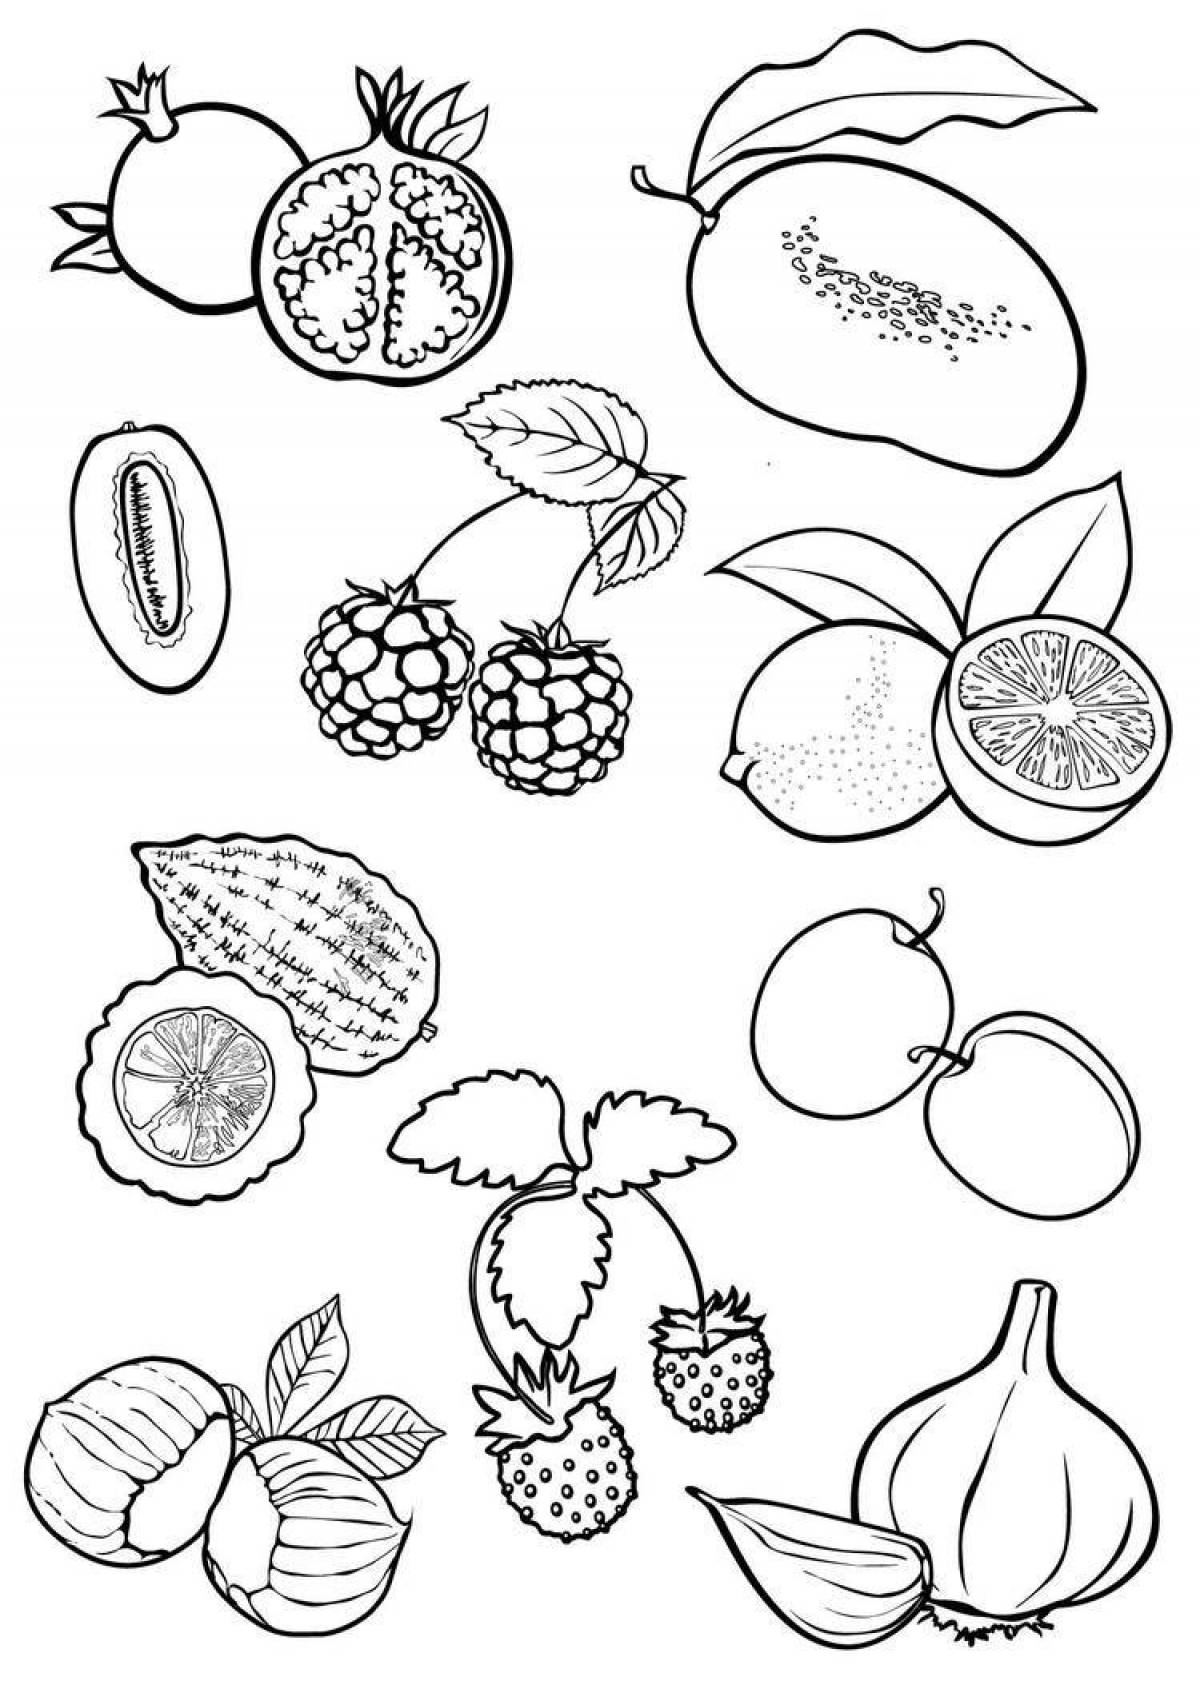 Comic coloring book fruits and vegetables